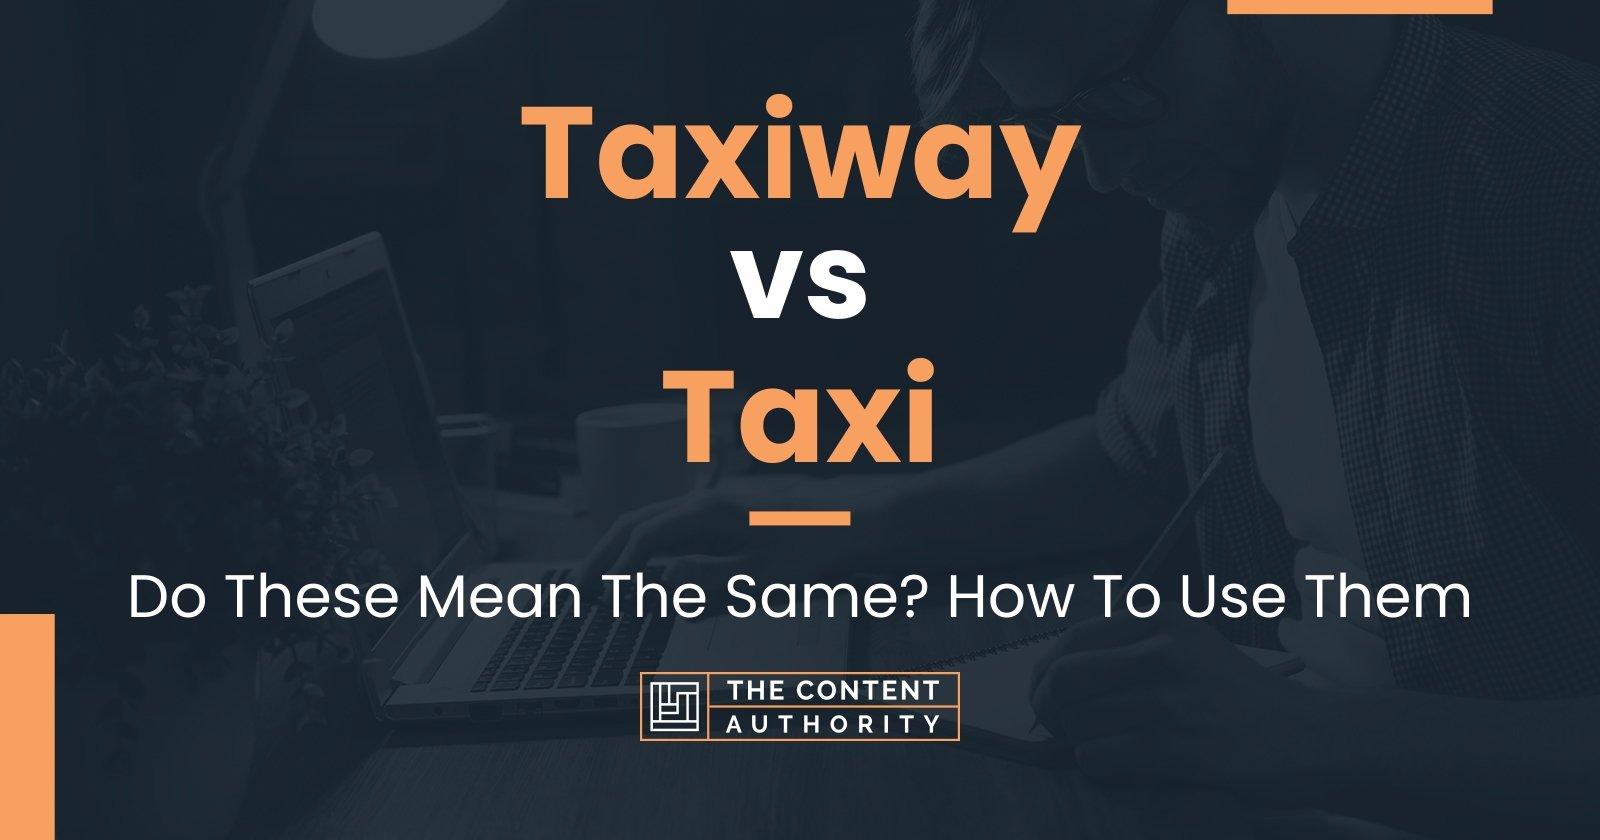 Taxiway vs Taxi: Do These Mean The Same? How To Use Them